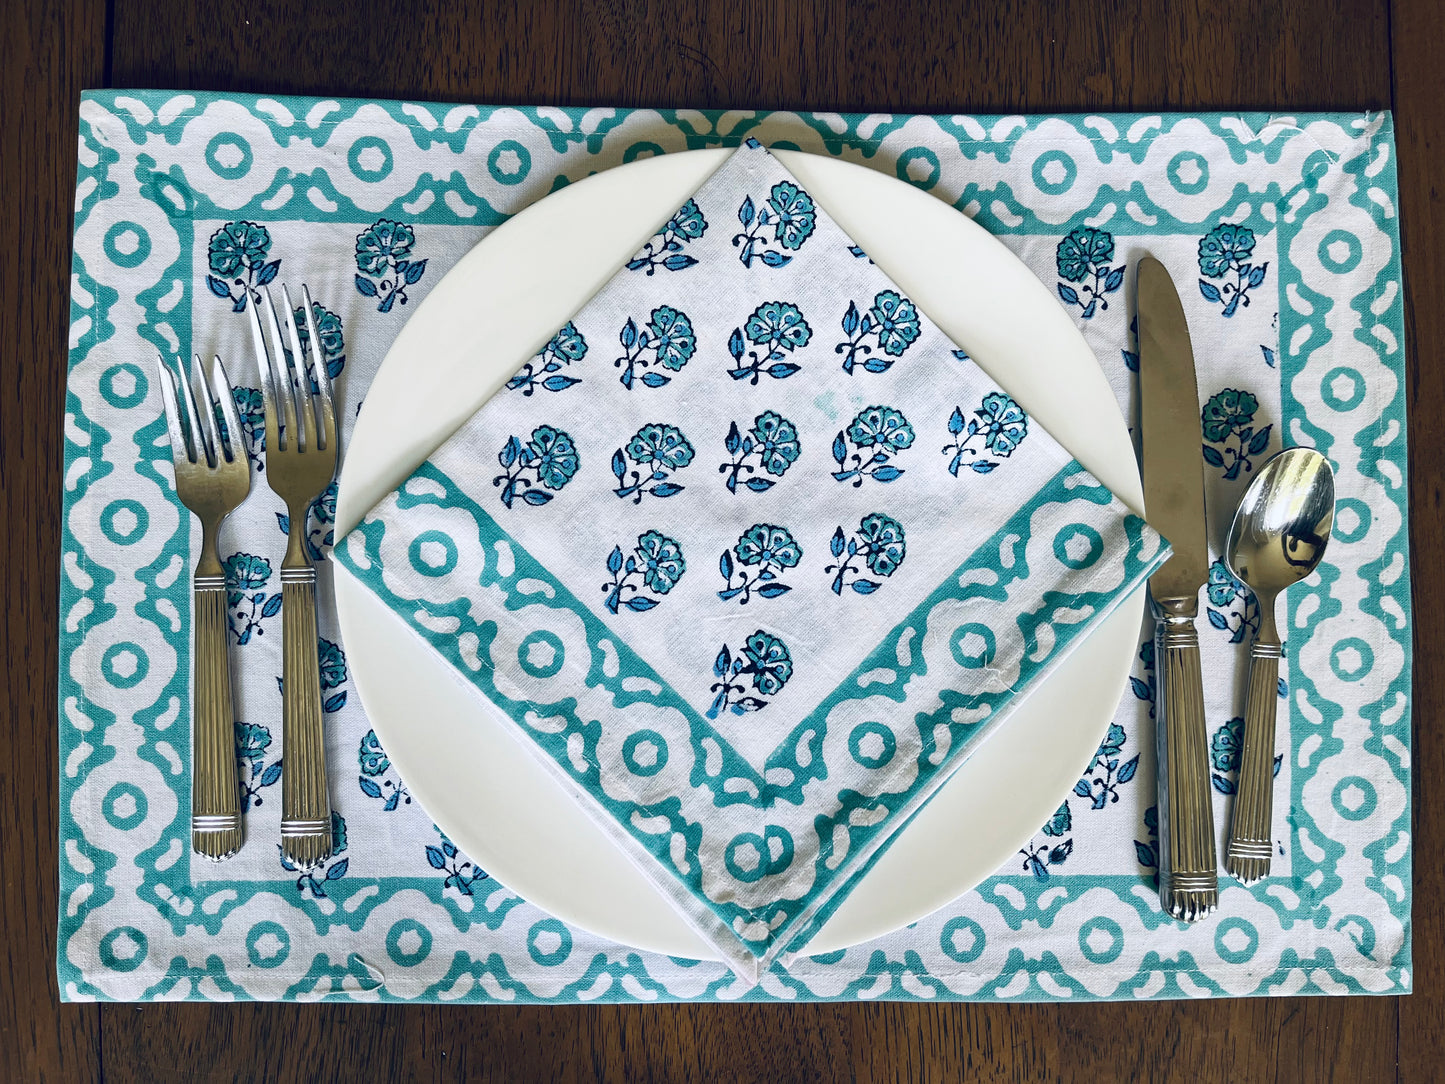 Placemats: Aqua w/ blue and navy floral